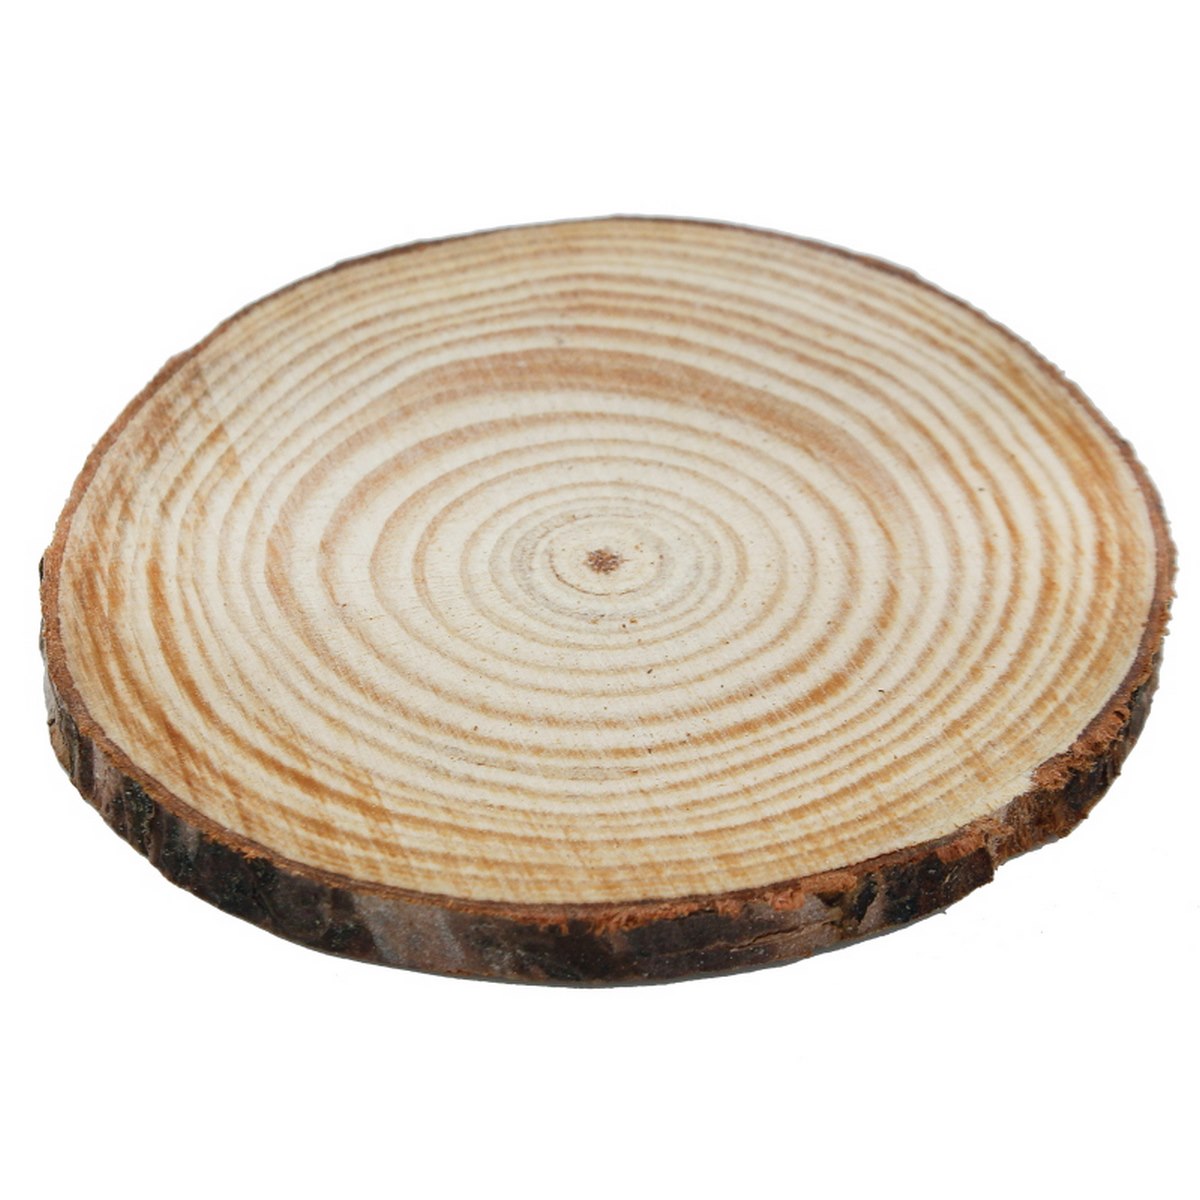 jags-mumbai Wooden Slice and Cut Out Round Wood Plate 5CM TO 6CM RWP6CM